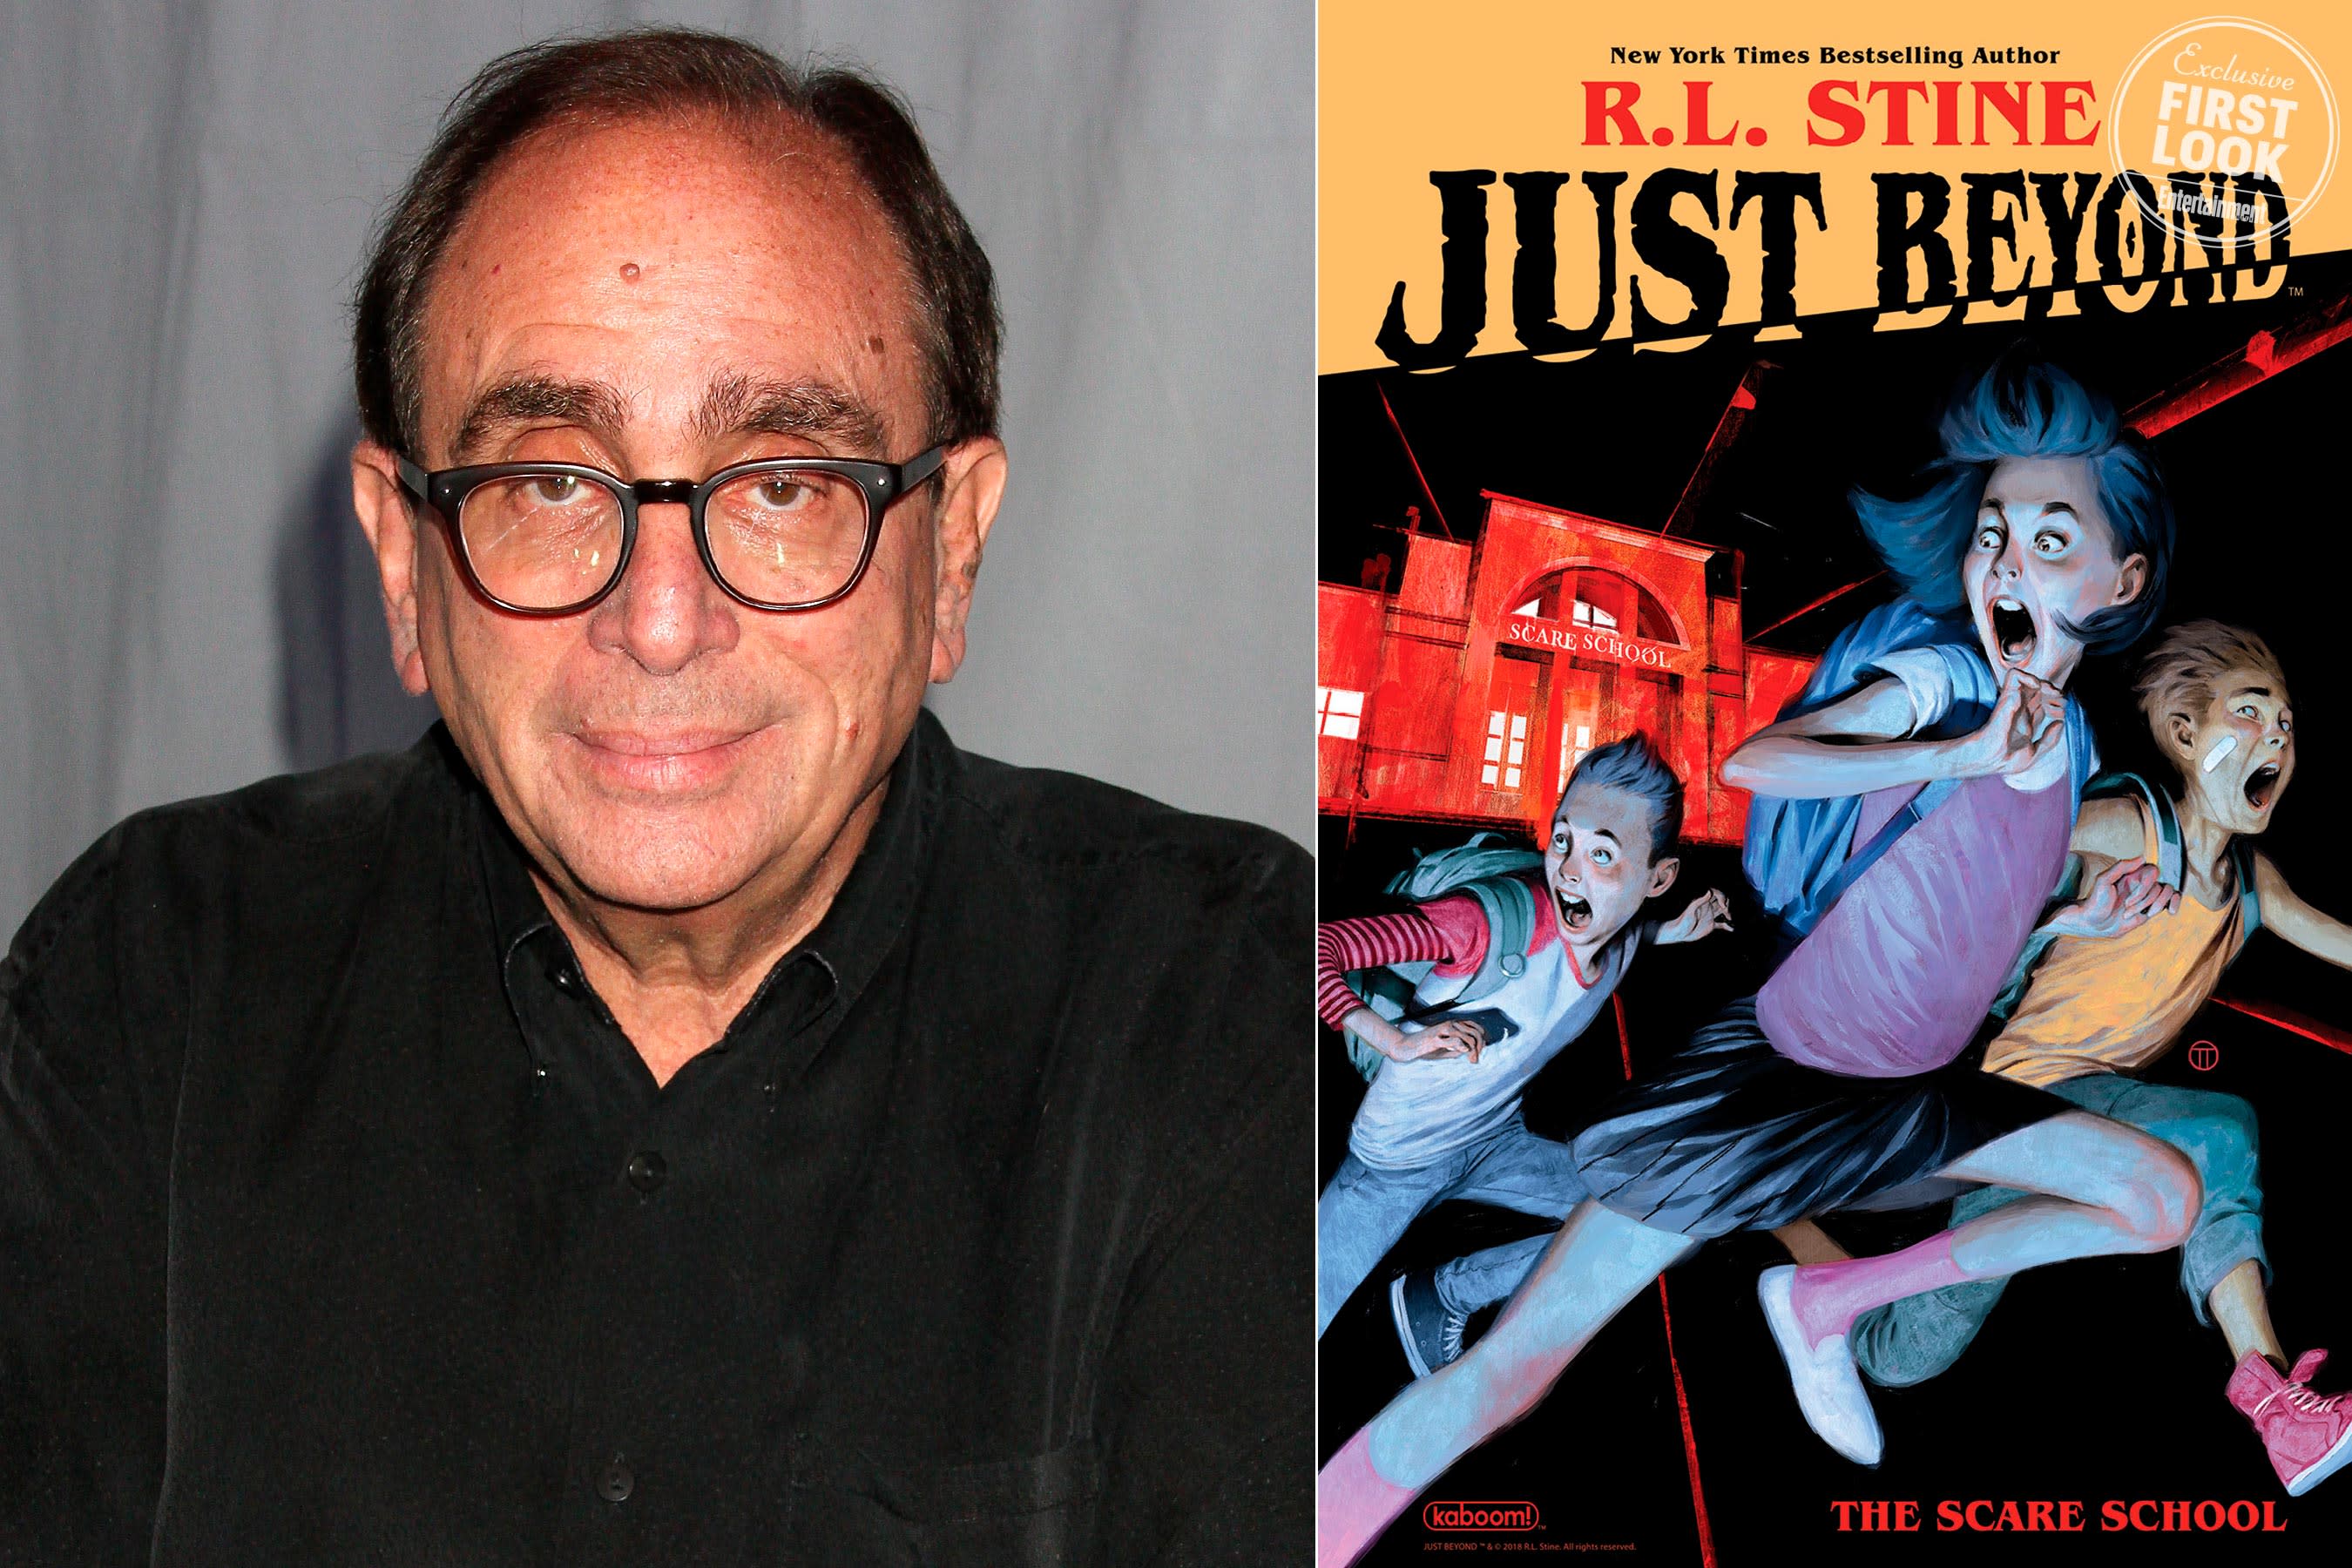 R.L. Stine to write new graphic novel series Just Beyond for Boom! Studios